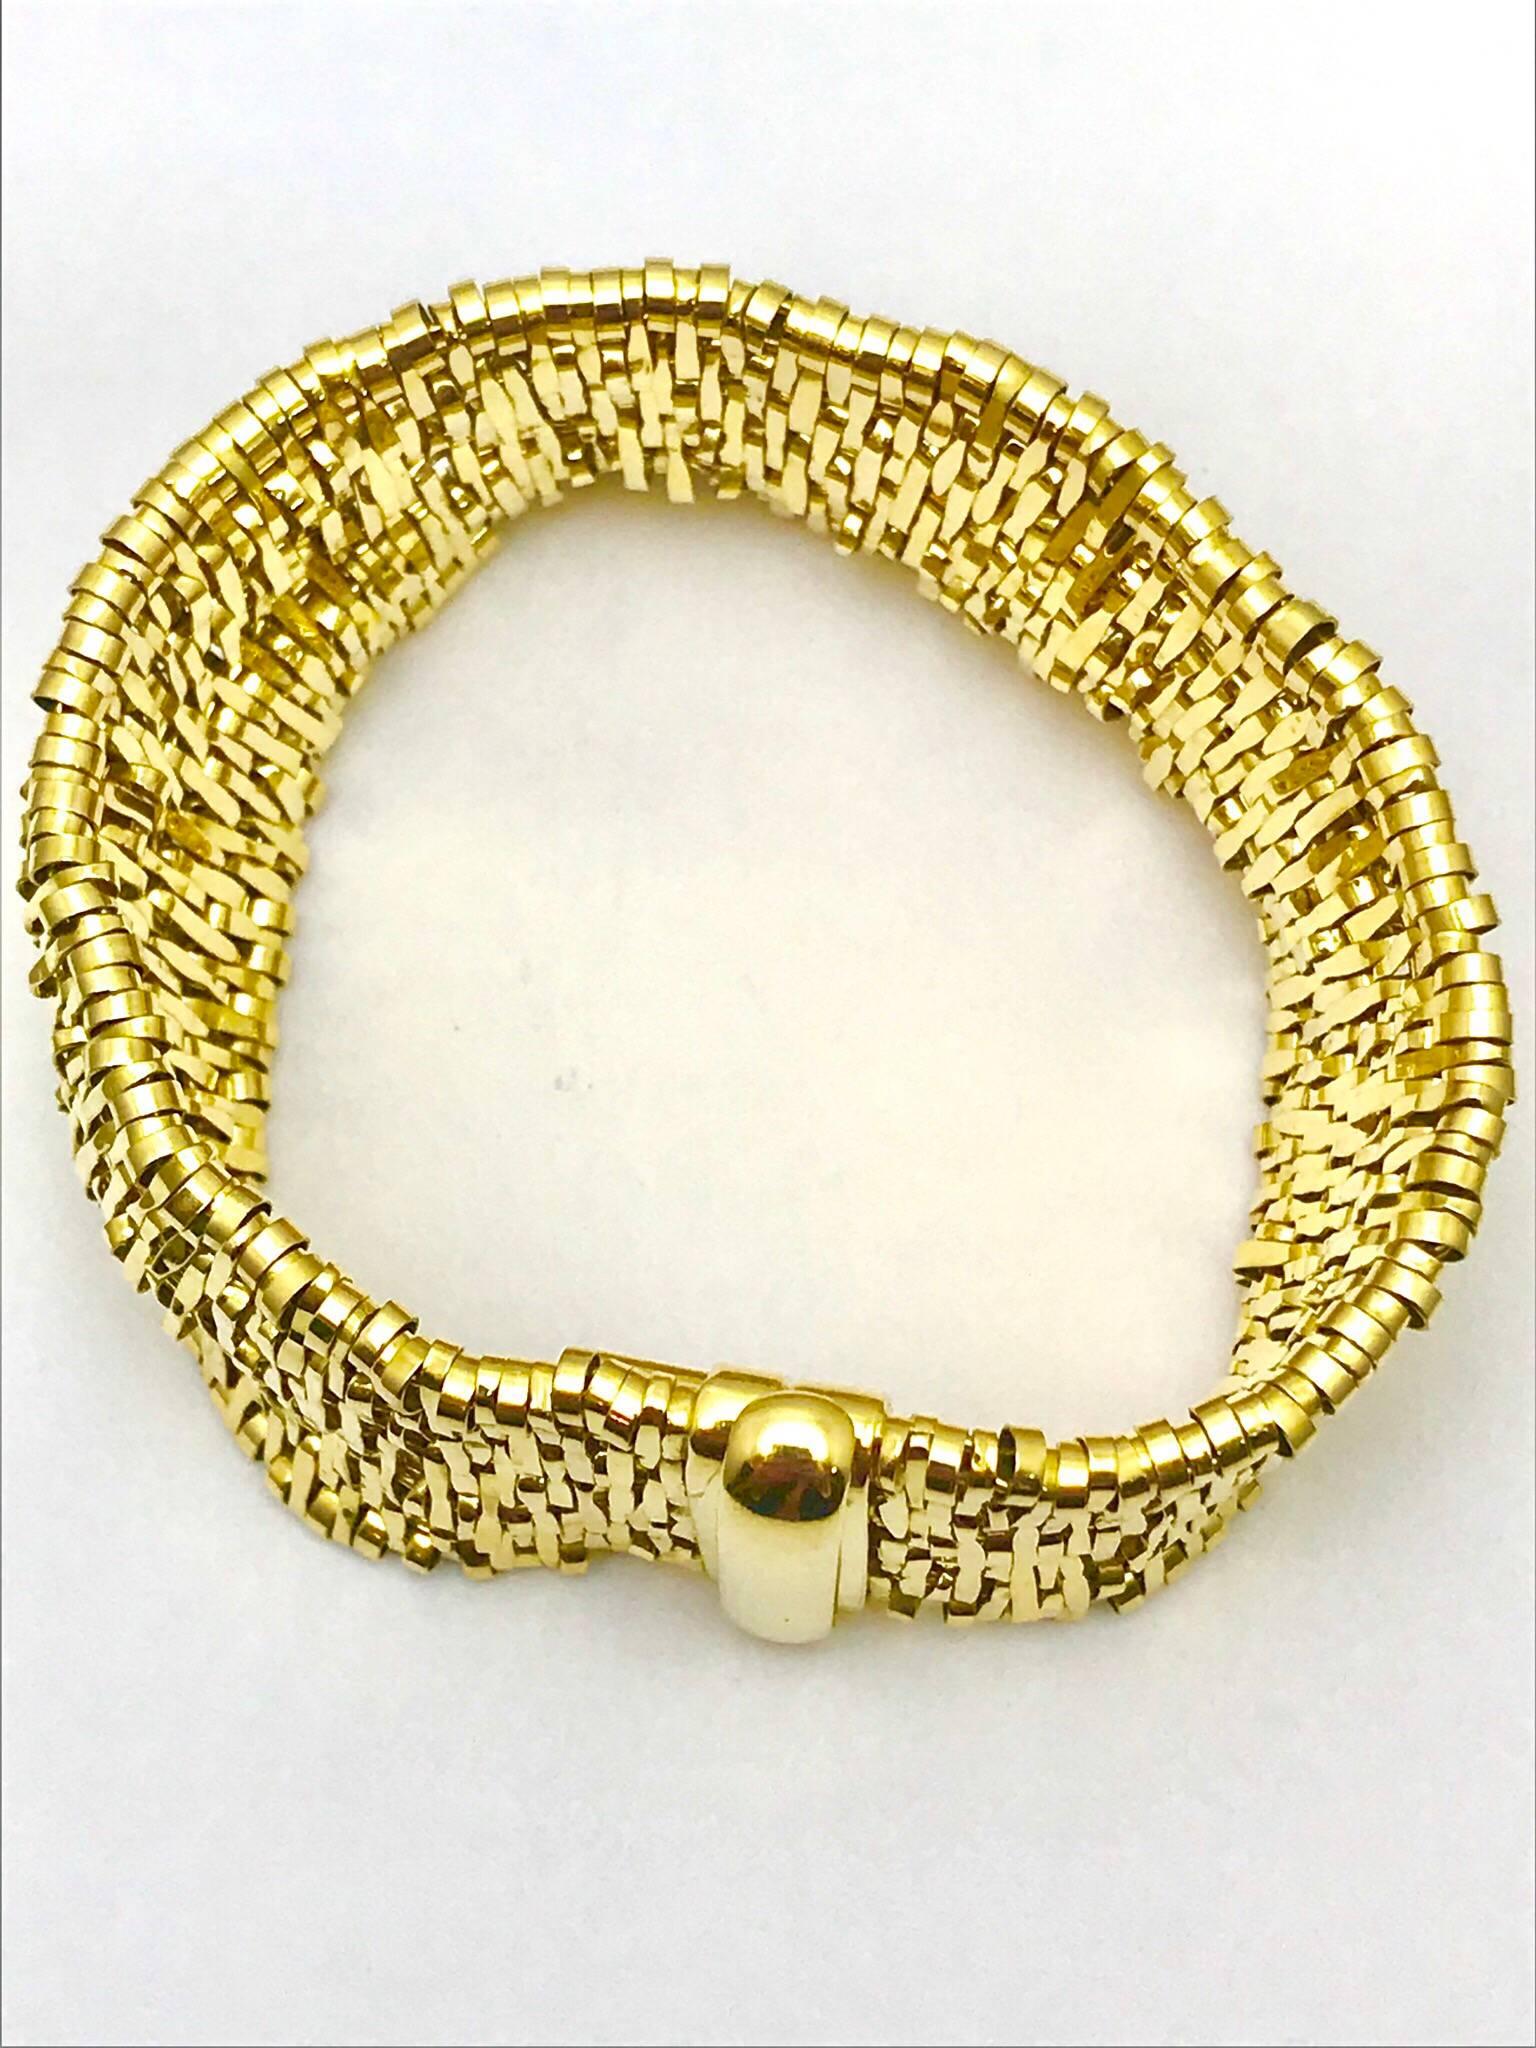 An Orlando Orlandini Fiandra wide woven link 18 karat yellow gold bracelet. The bracelet is made up of small woven links, creating a very soft feel to the skin. It has a push clasp with a safety lock. 81.35 grams.

Signature: Orlandini
Hallmark: